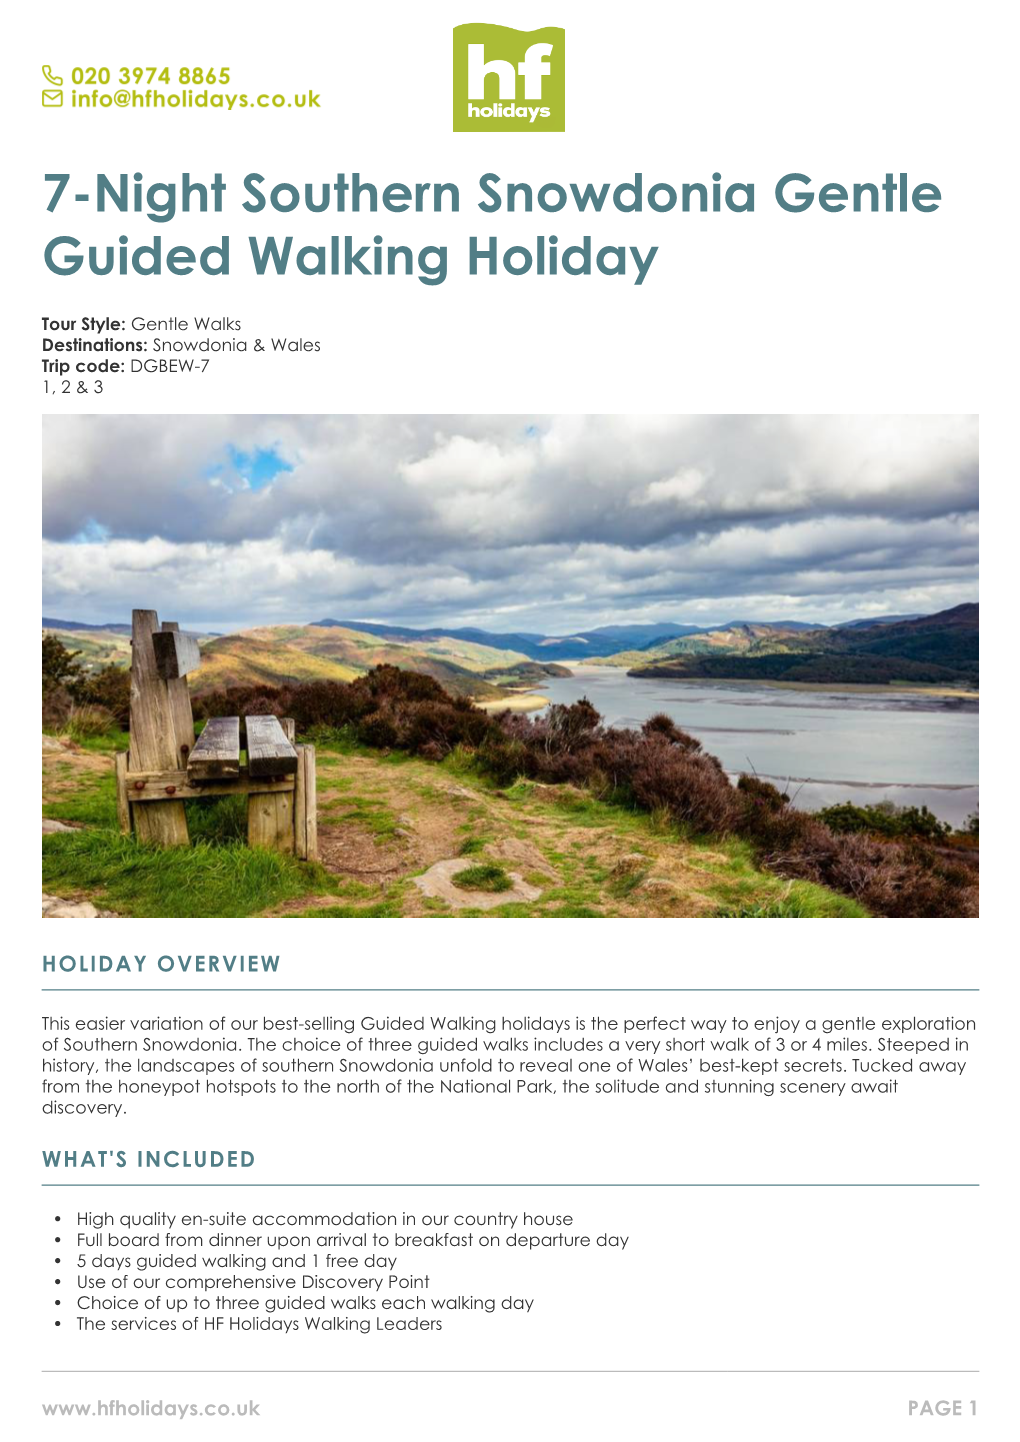 7-Night Southern Snowdonia Gentle Guided Walking Holiday